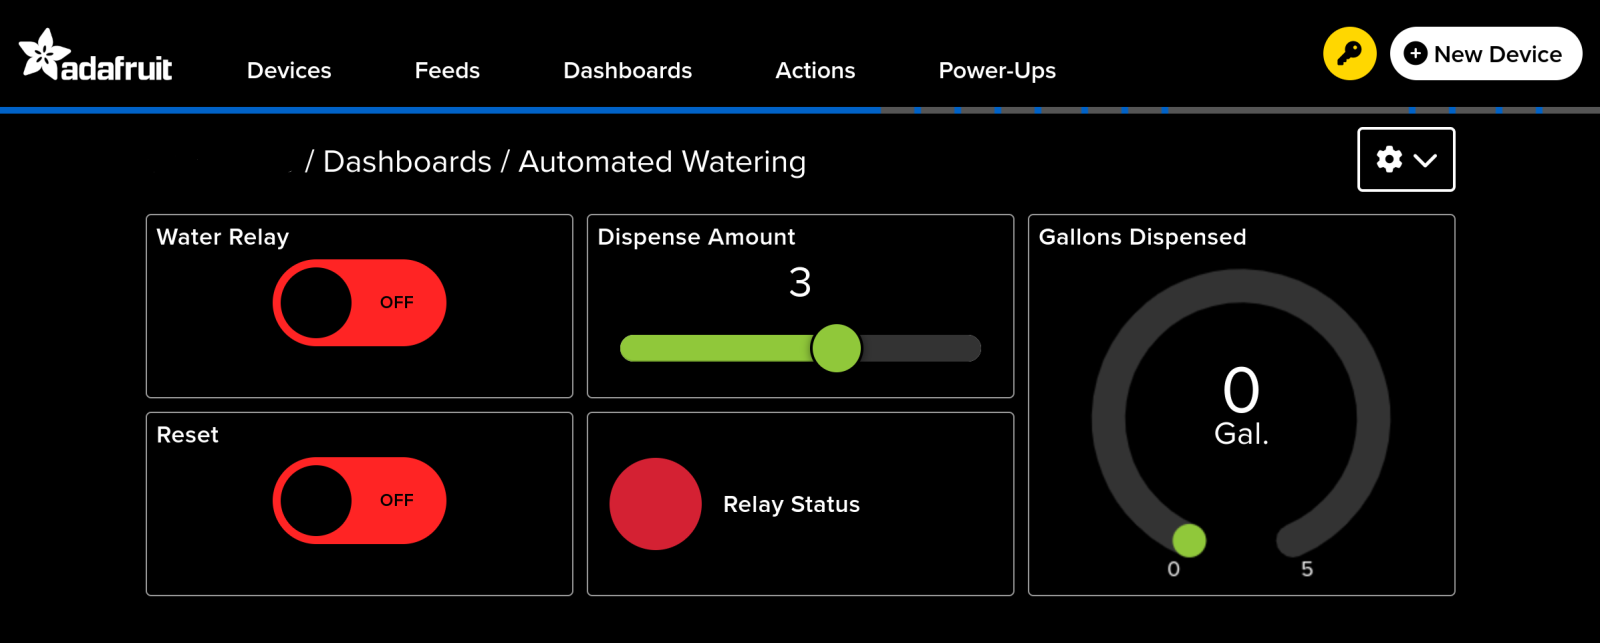 watering dashboard.png